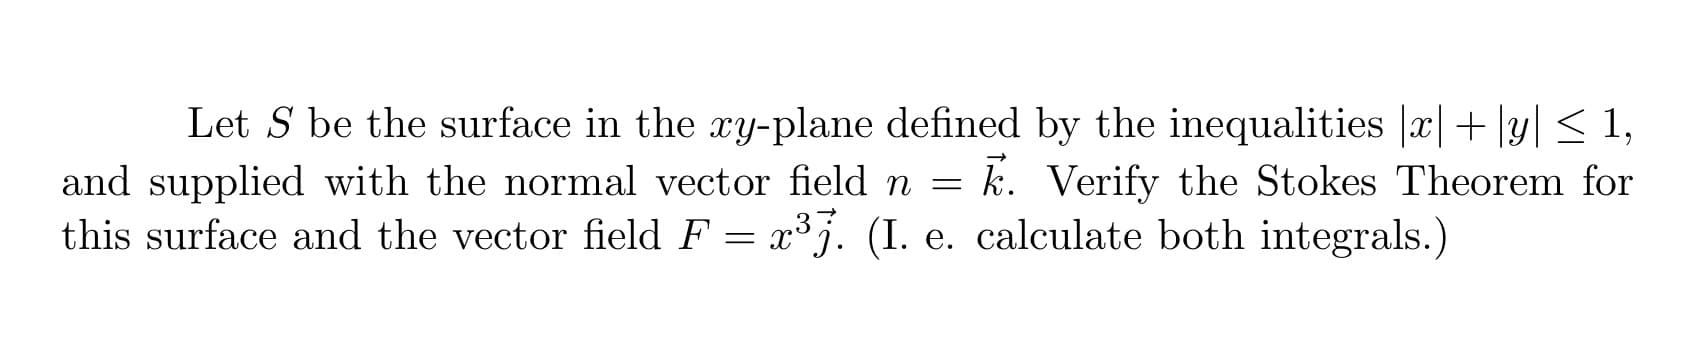 Let S be the surface in the xy-plane defined by the inequalities |æ|+ |y| < 1,
k. Verify the Stokes Theorem for
and supplied with the normal vector field n =
this surface and the vector field F = x³j. (I. e. calculate both integrals.)
